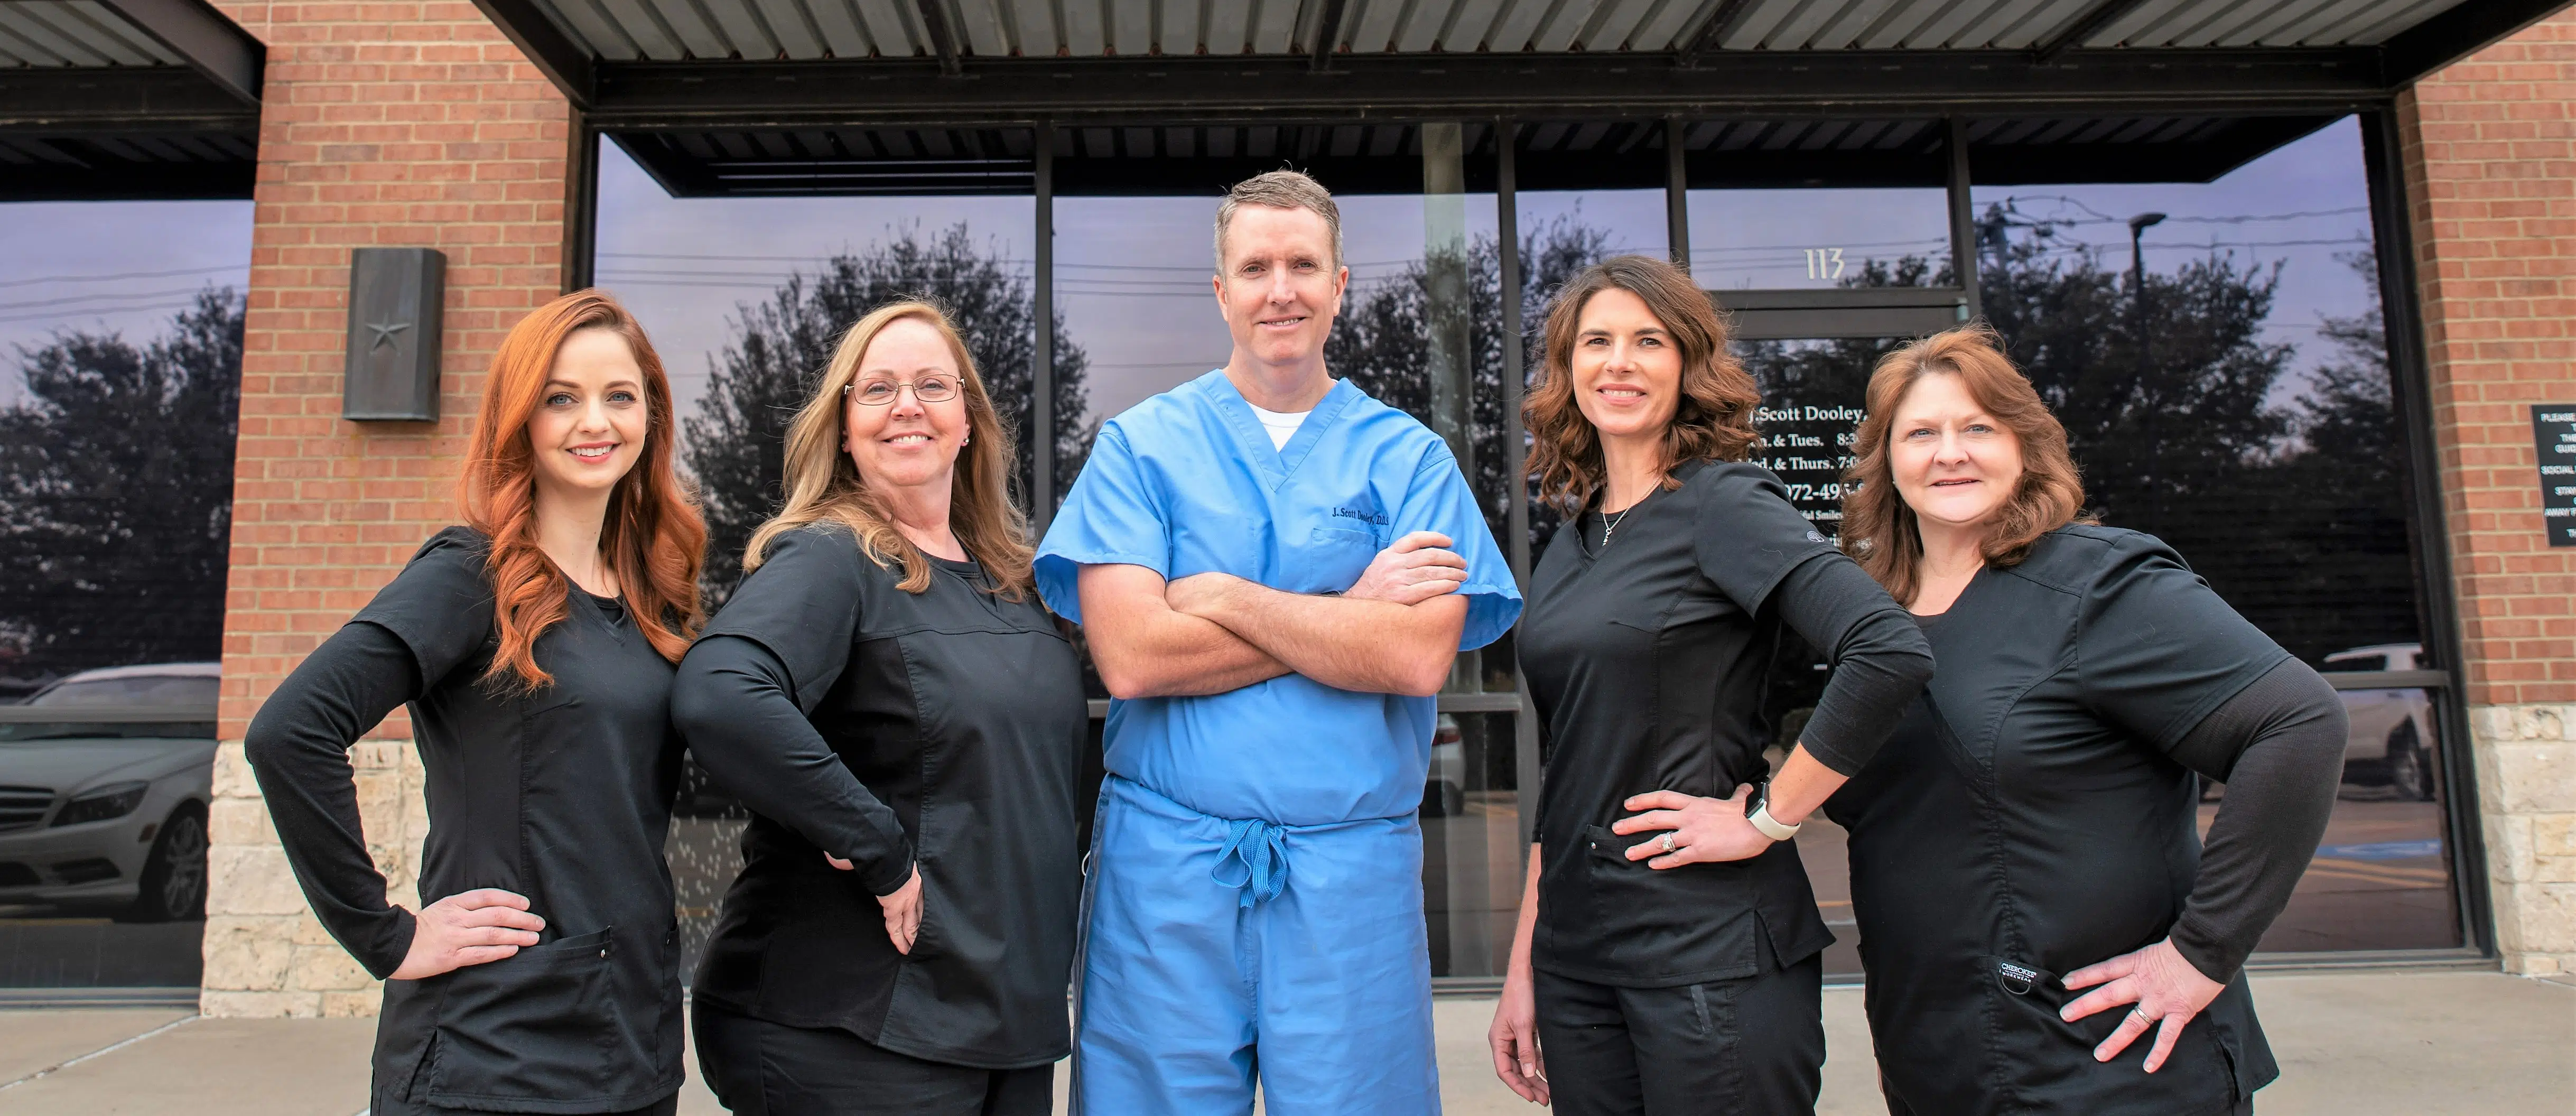 Our Garland dental team smiling for a picture with Dr. Scott Dooley, dentist in Garland, in the middle.